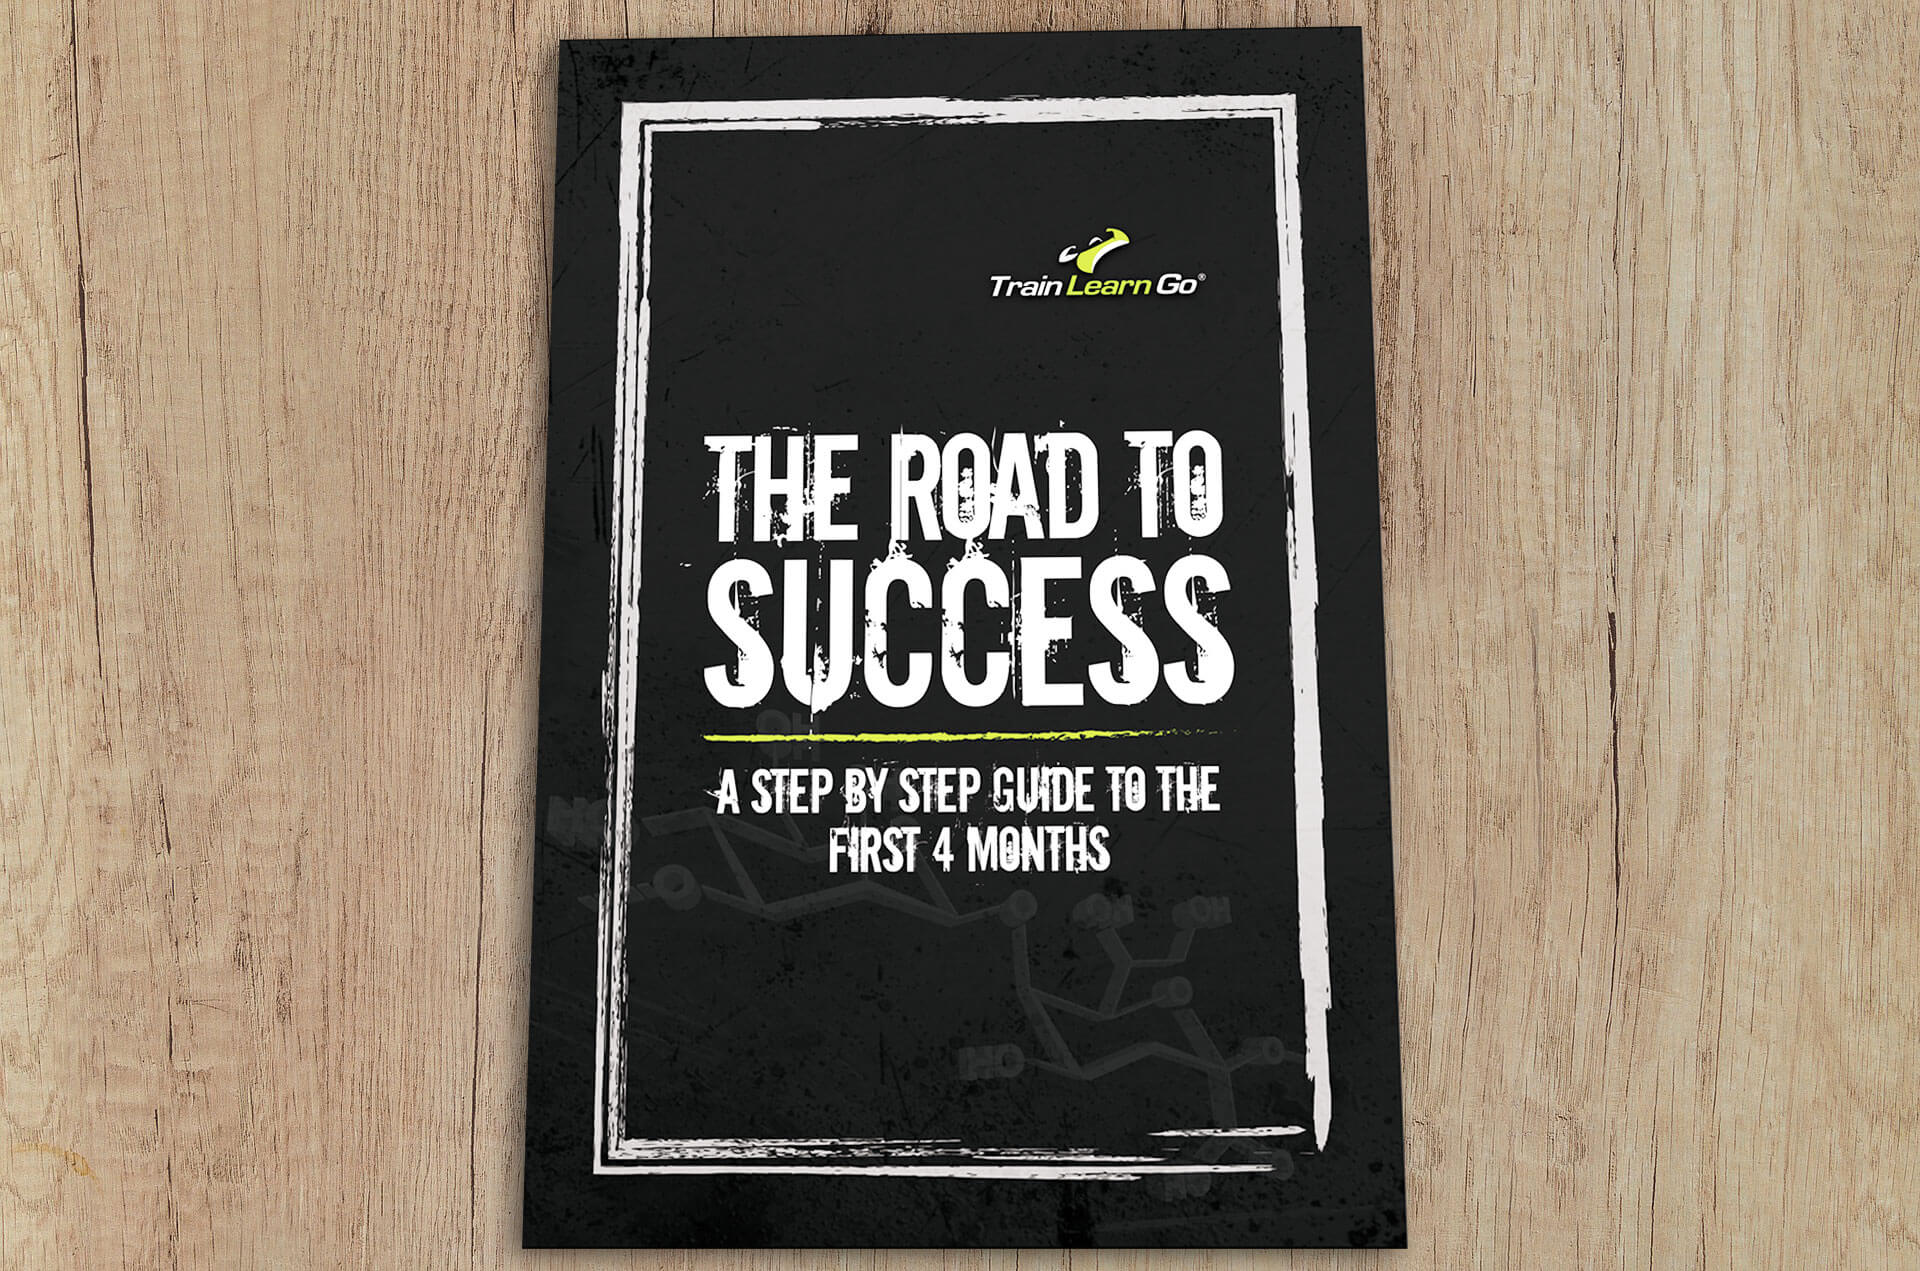 A Step by Step Guide to Success